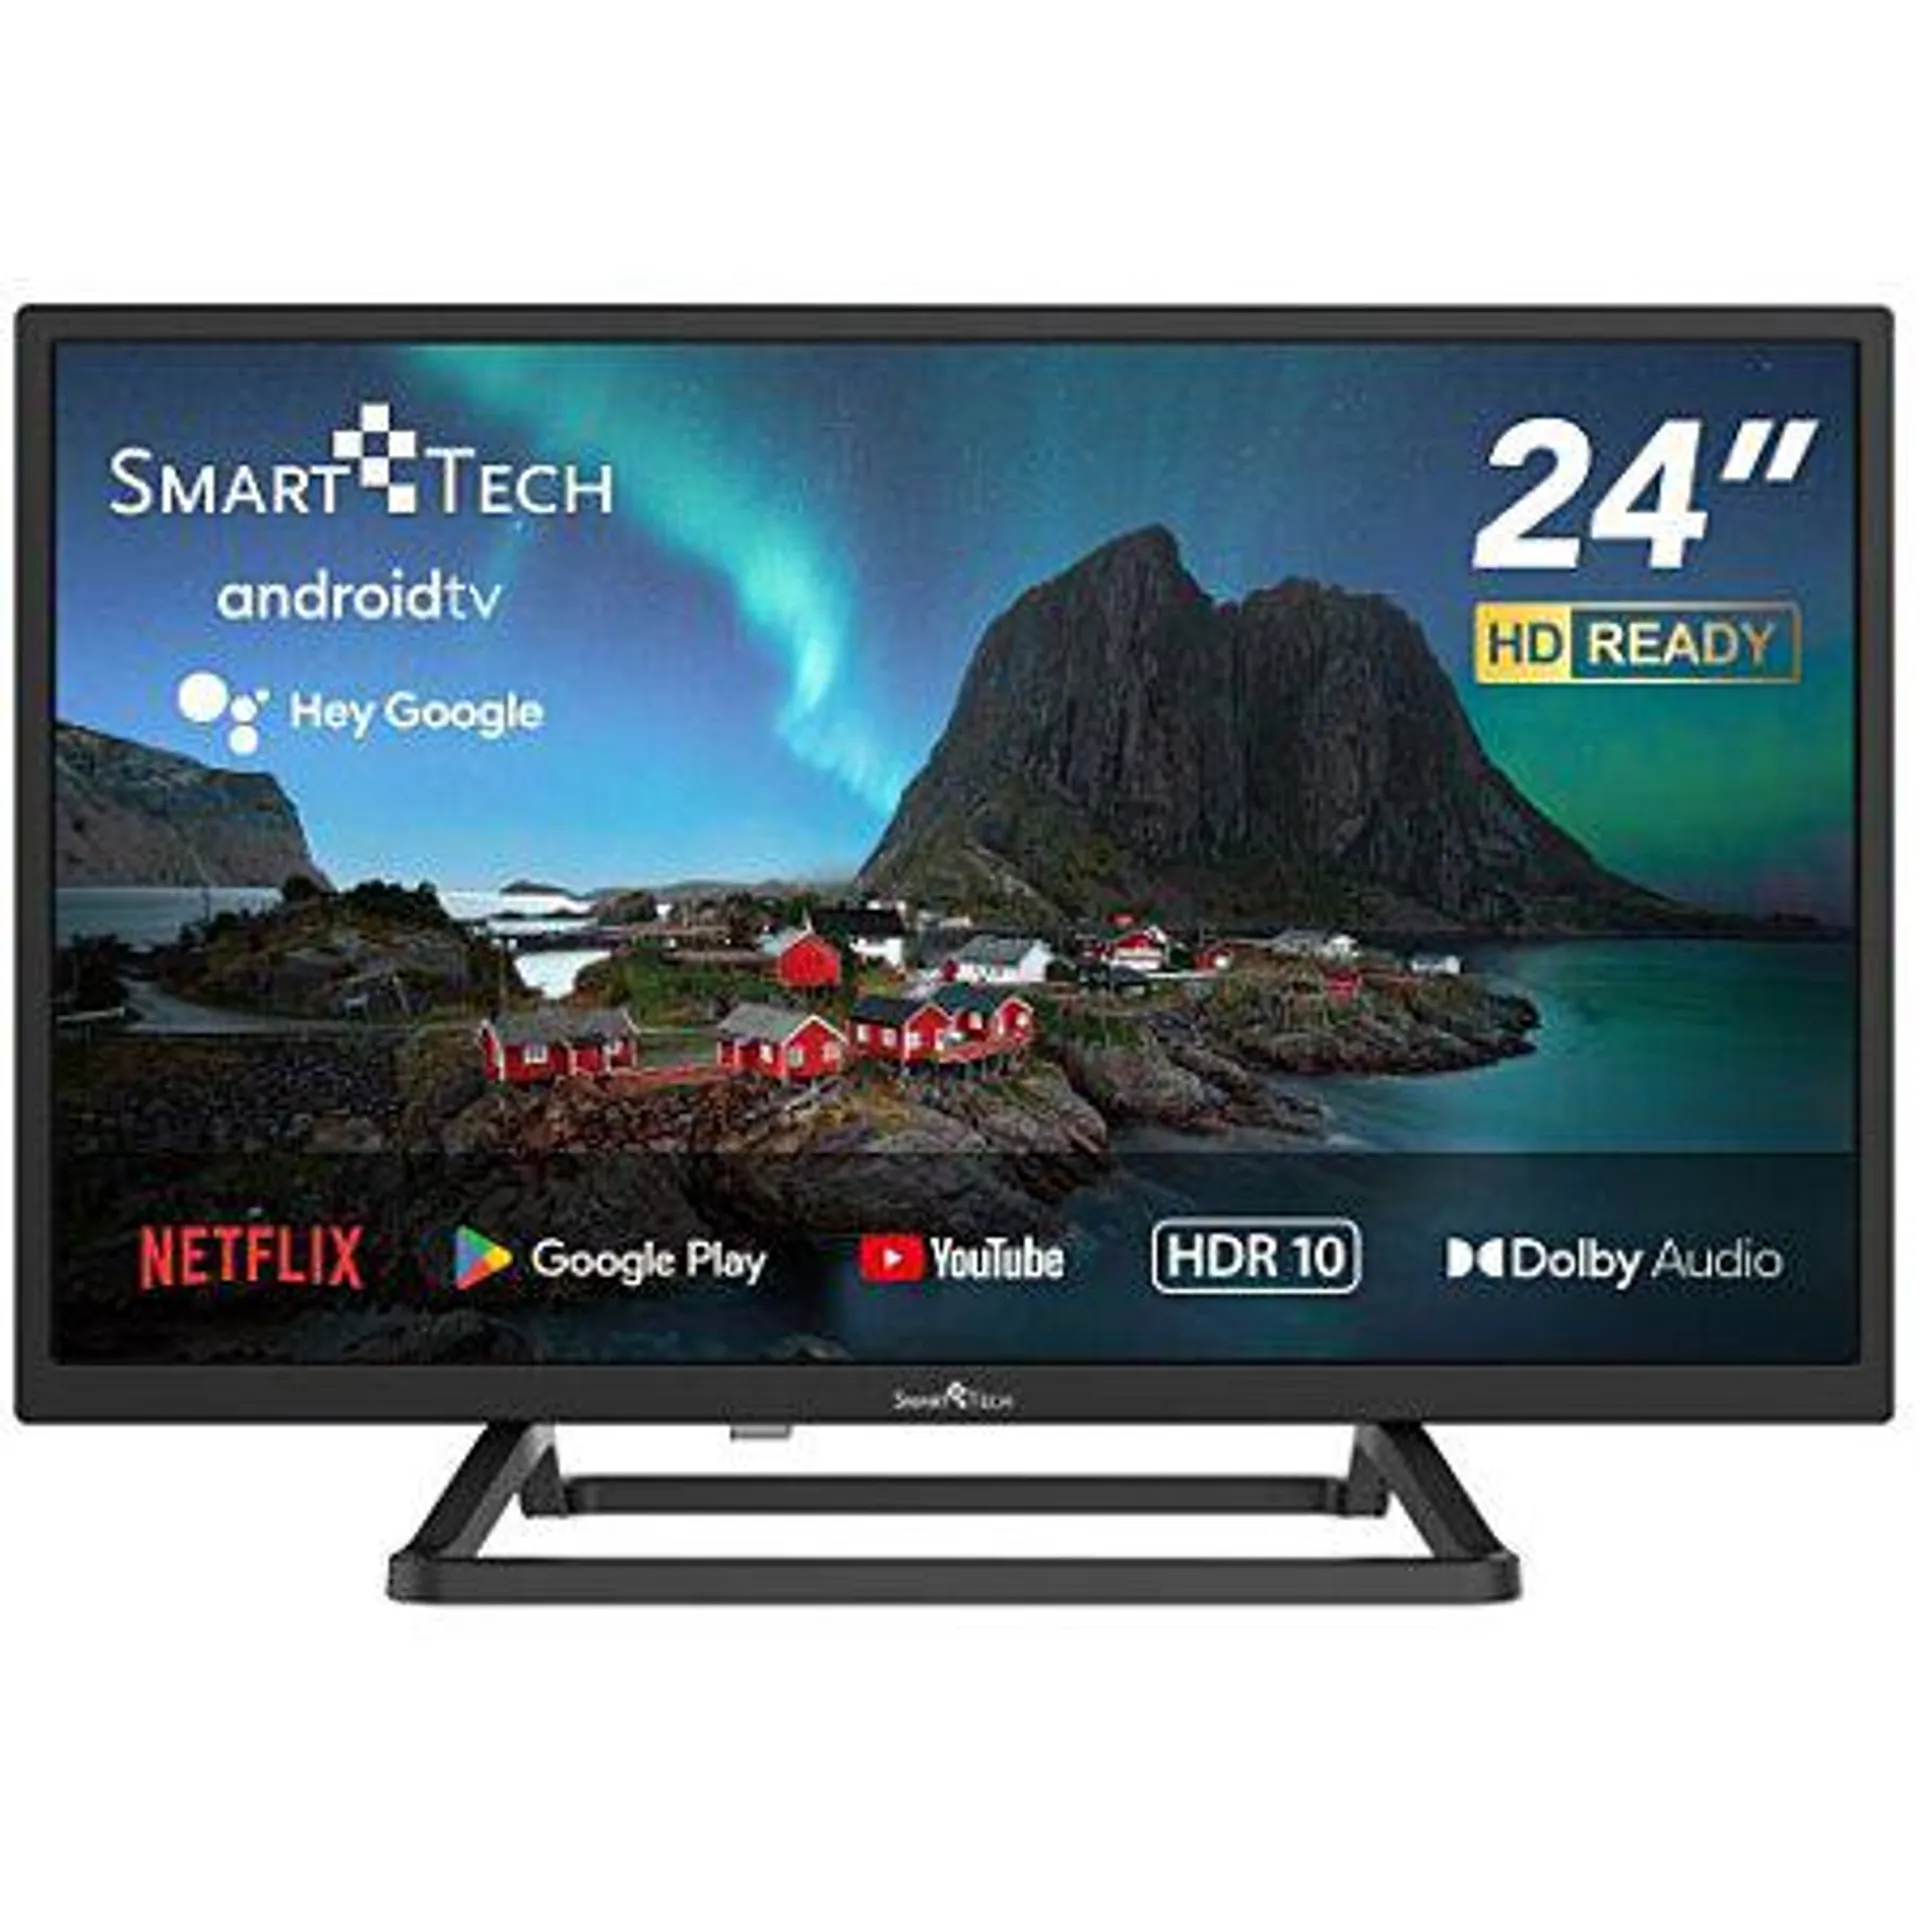 Smart Tech TV Android LED HD 24 pouces (60cm) 24HA20T3 Triple Tuner Dolby Audio H.265 HDMI USB